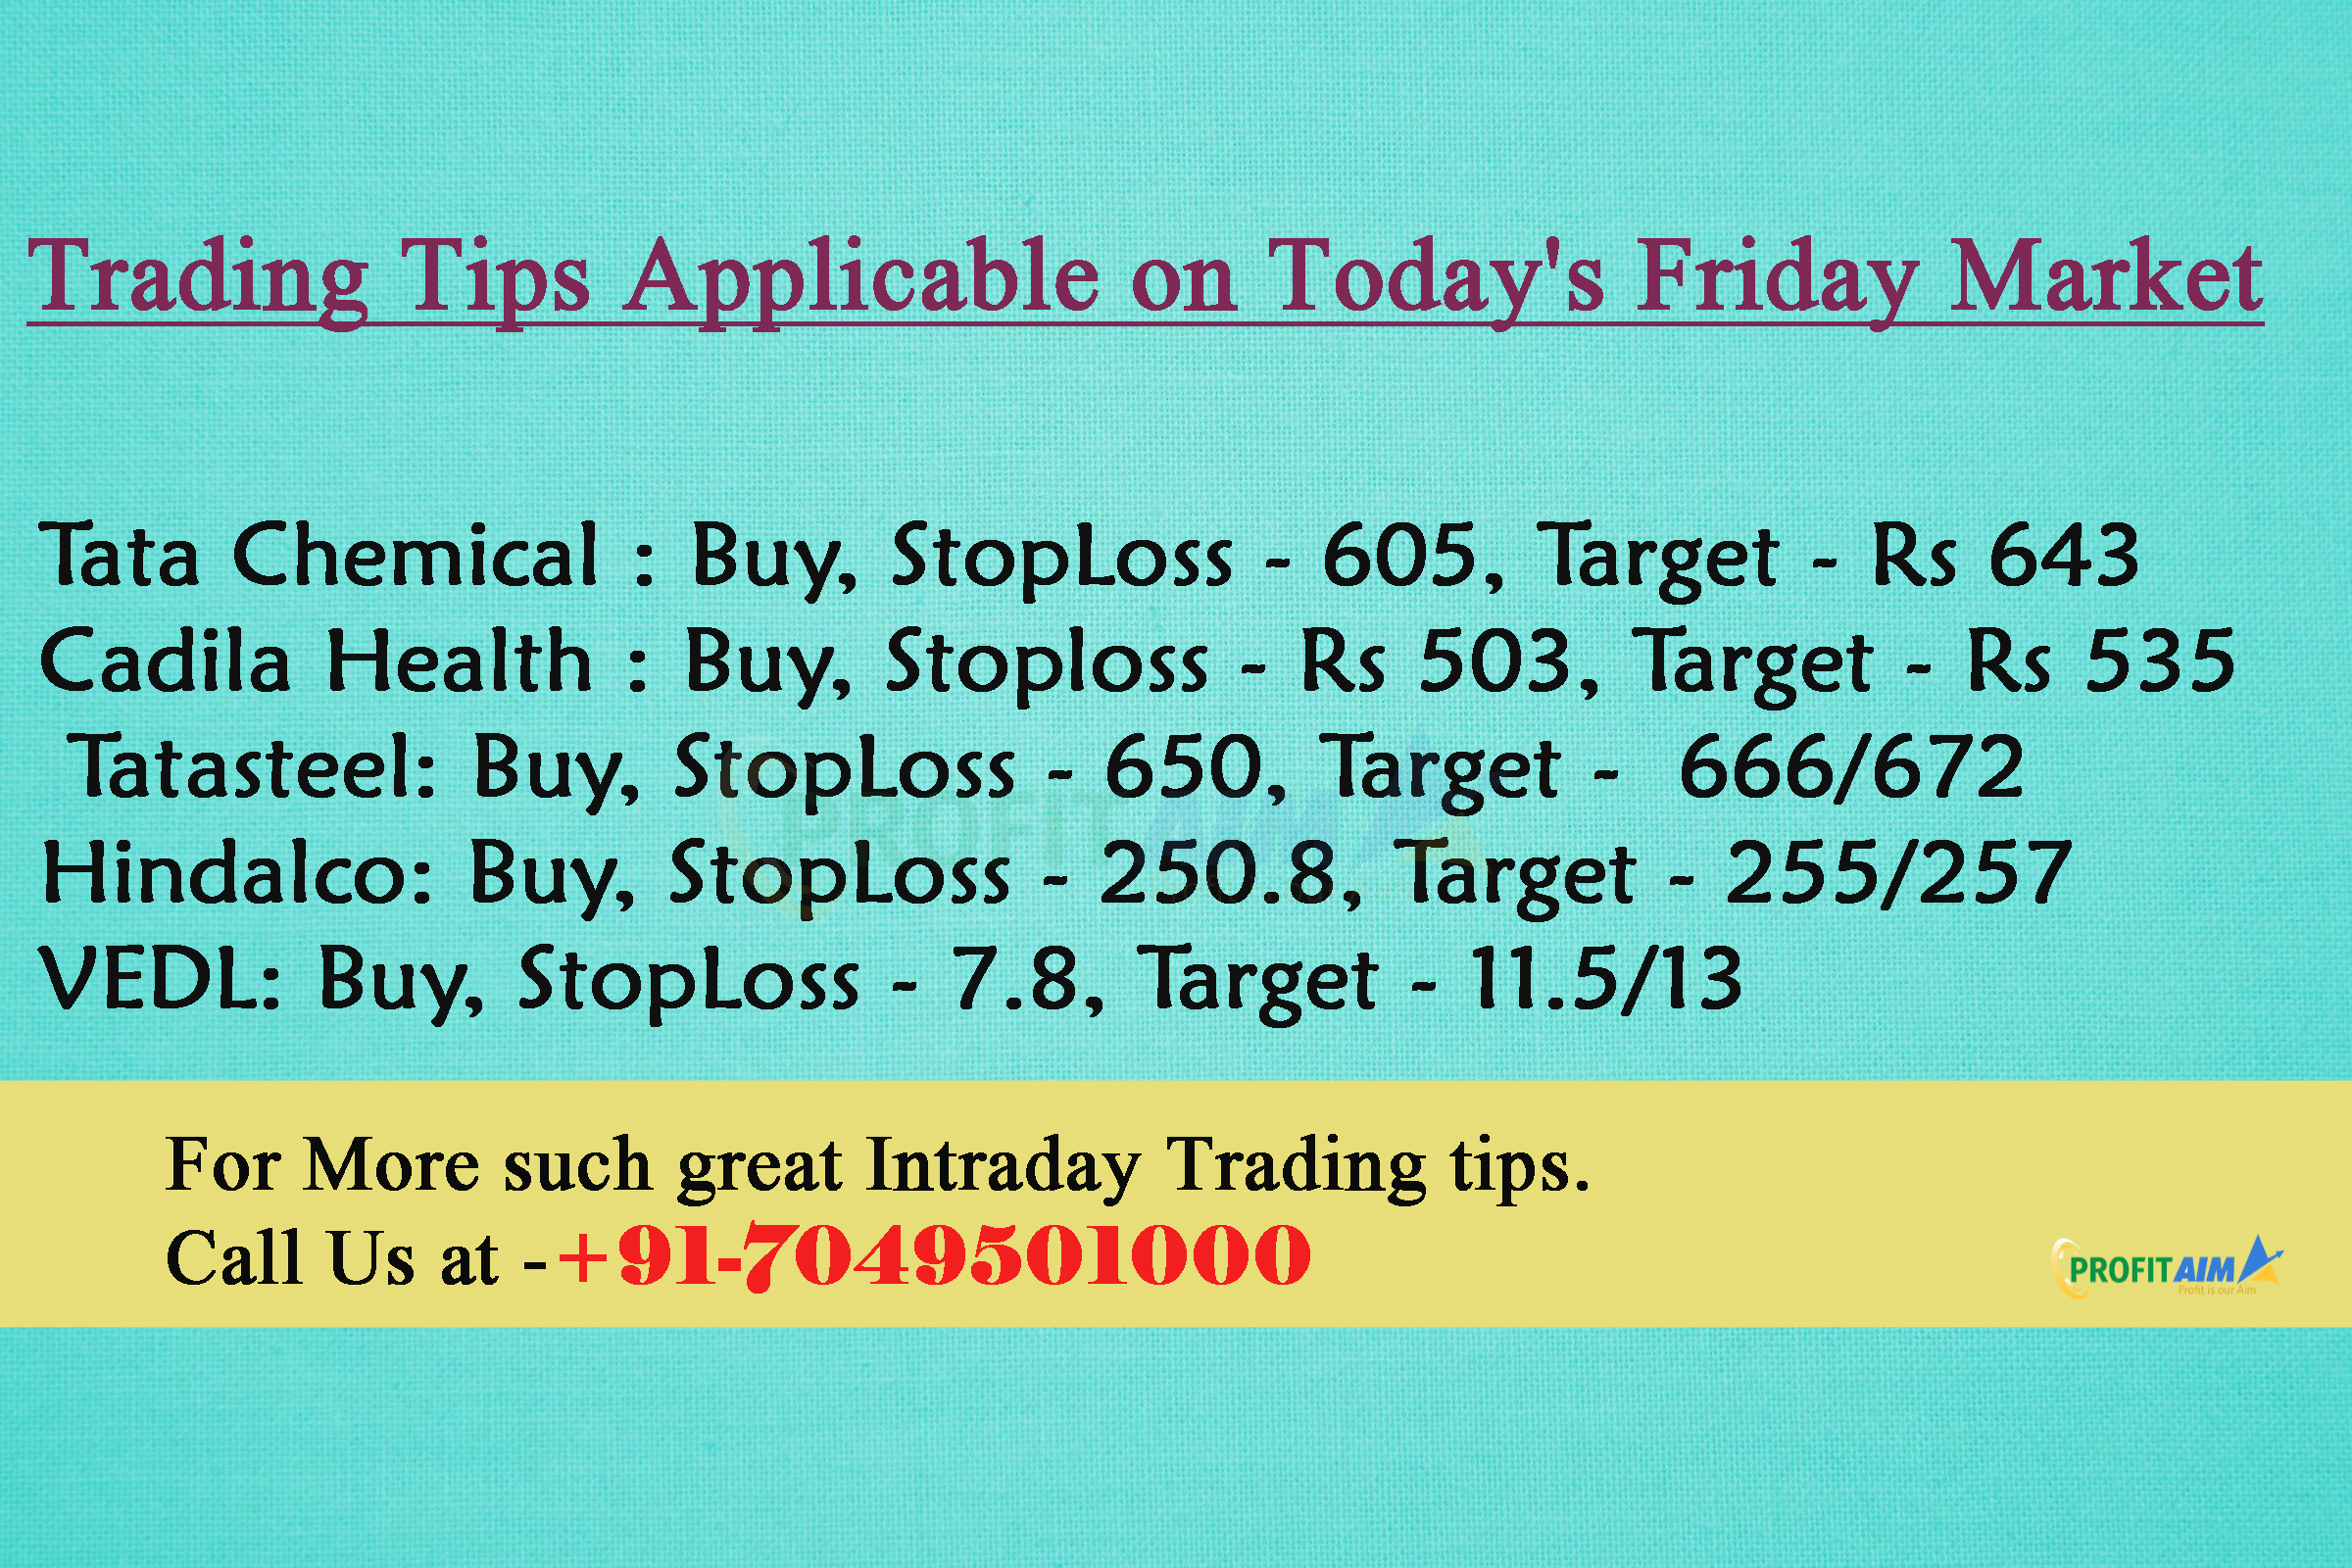 Intradaing Tips and Stock option tips By ProfitAim